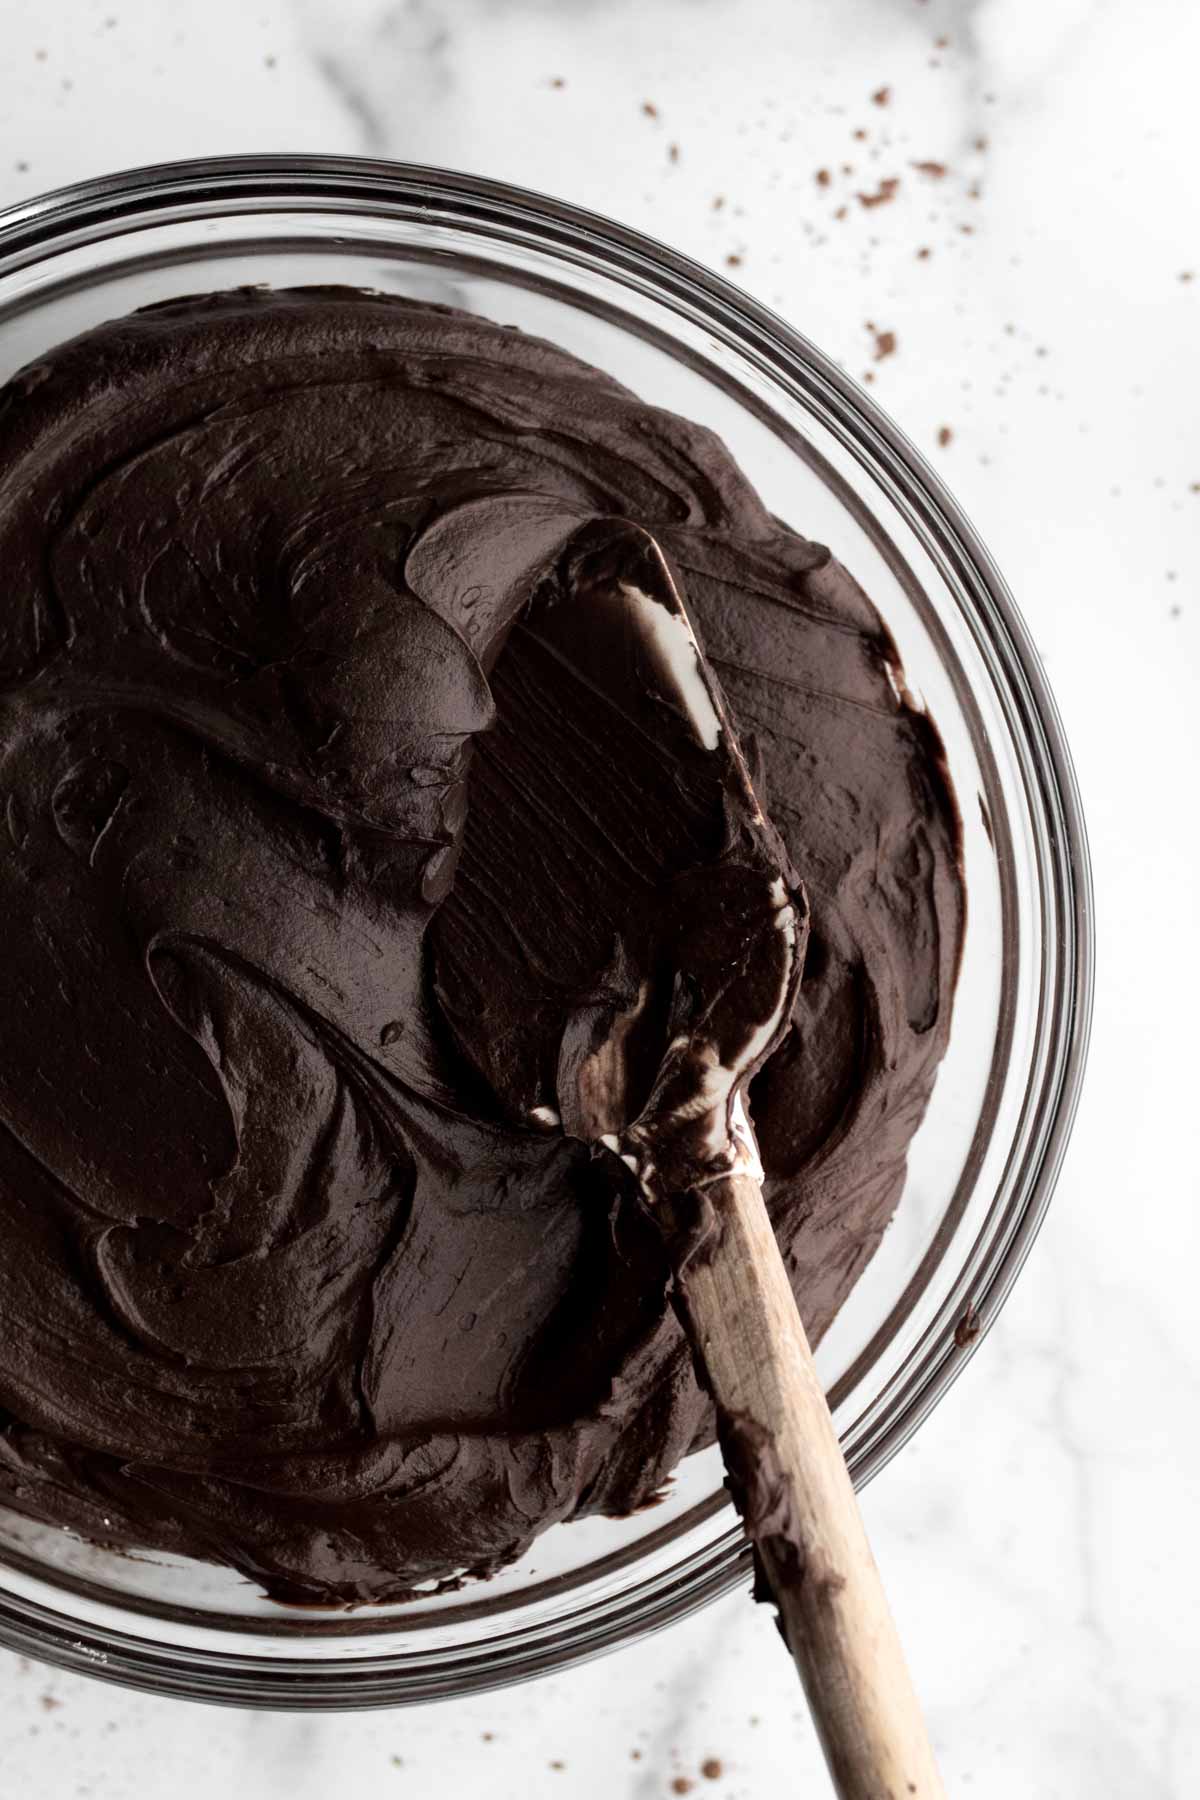 A closer look at the chocolate frosting.